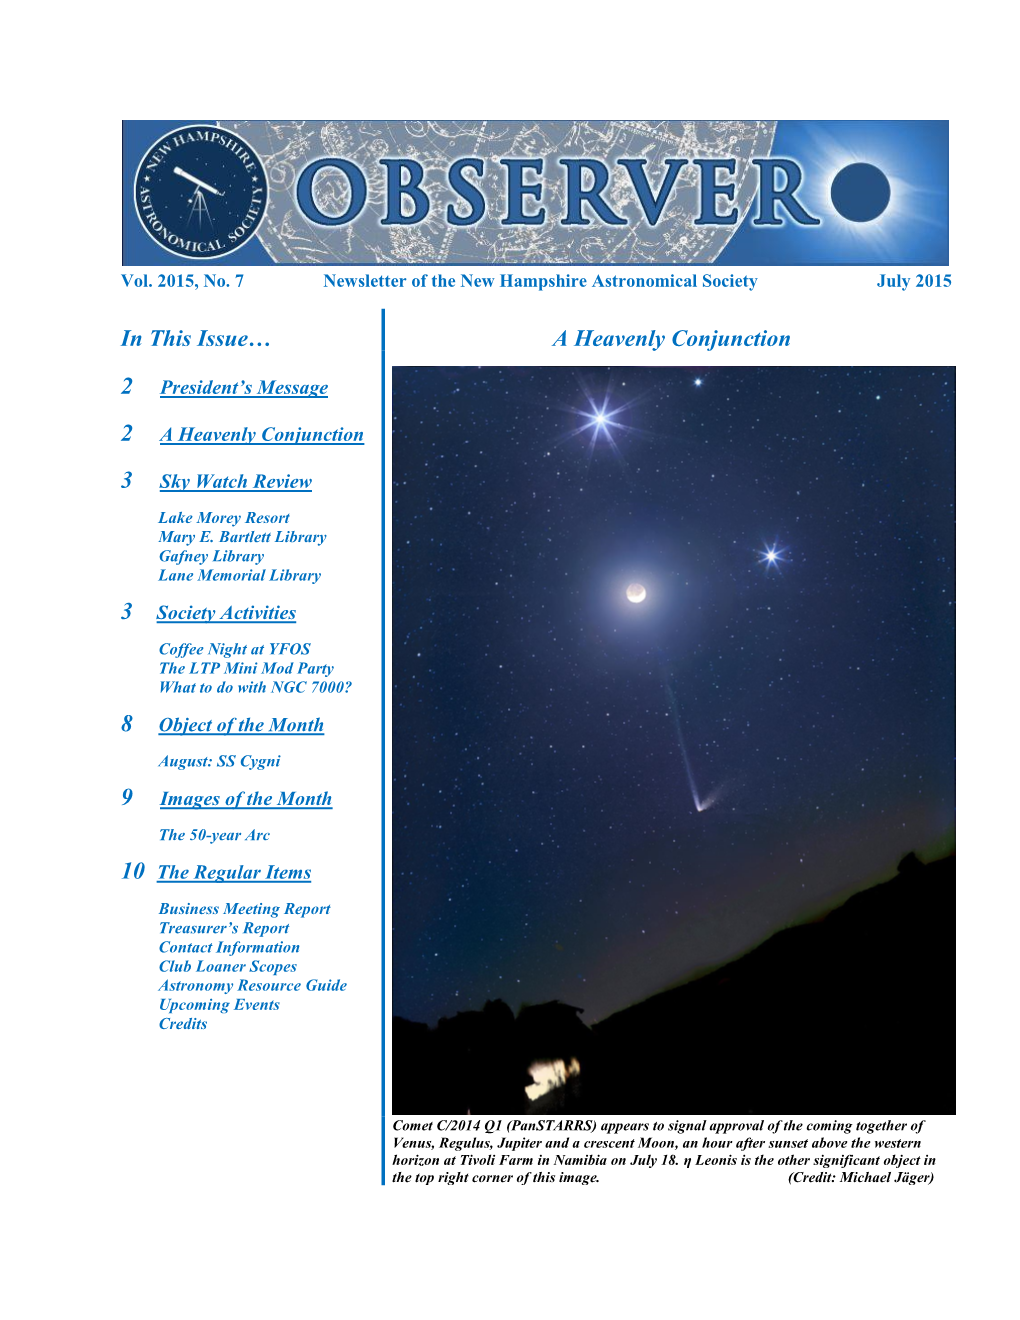 In This Issue… a Heavenly Conjunction